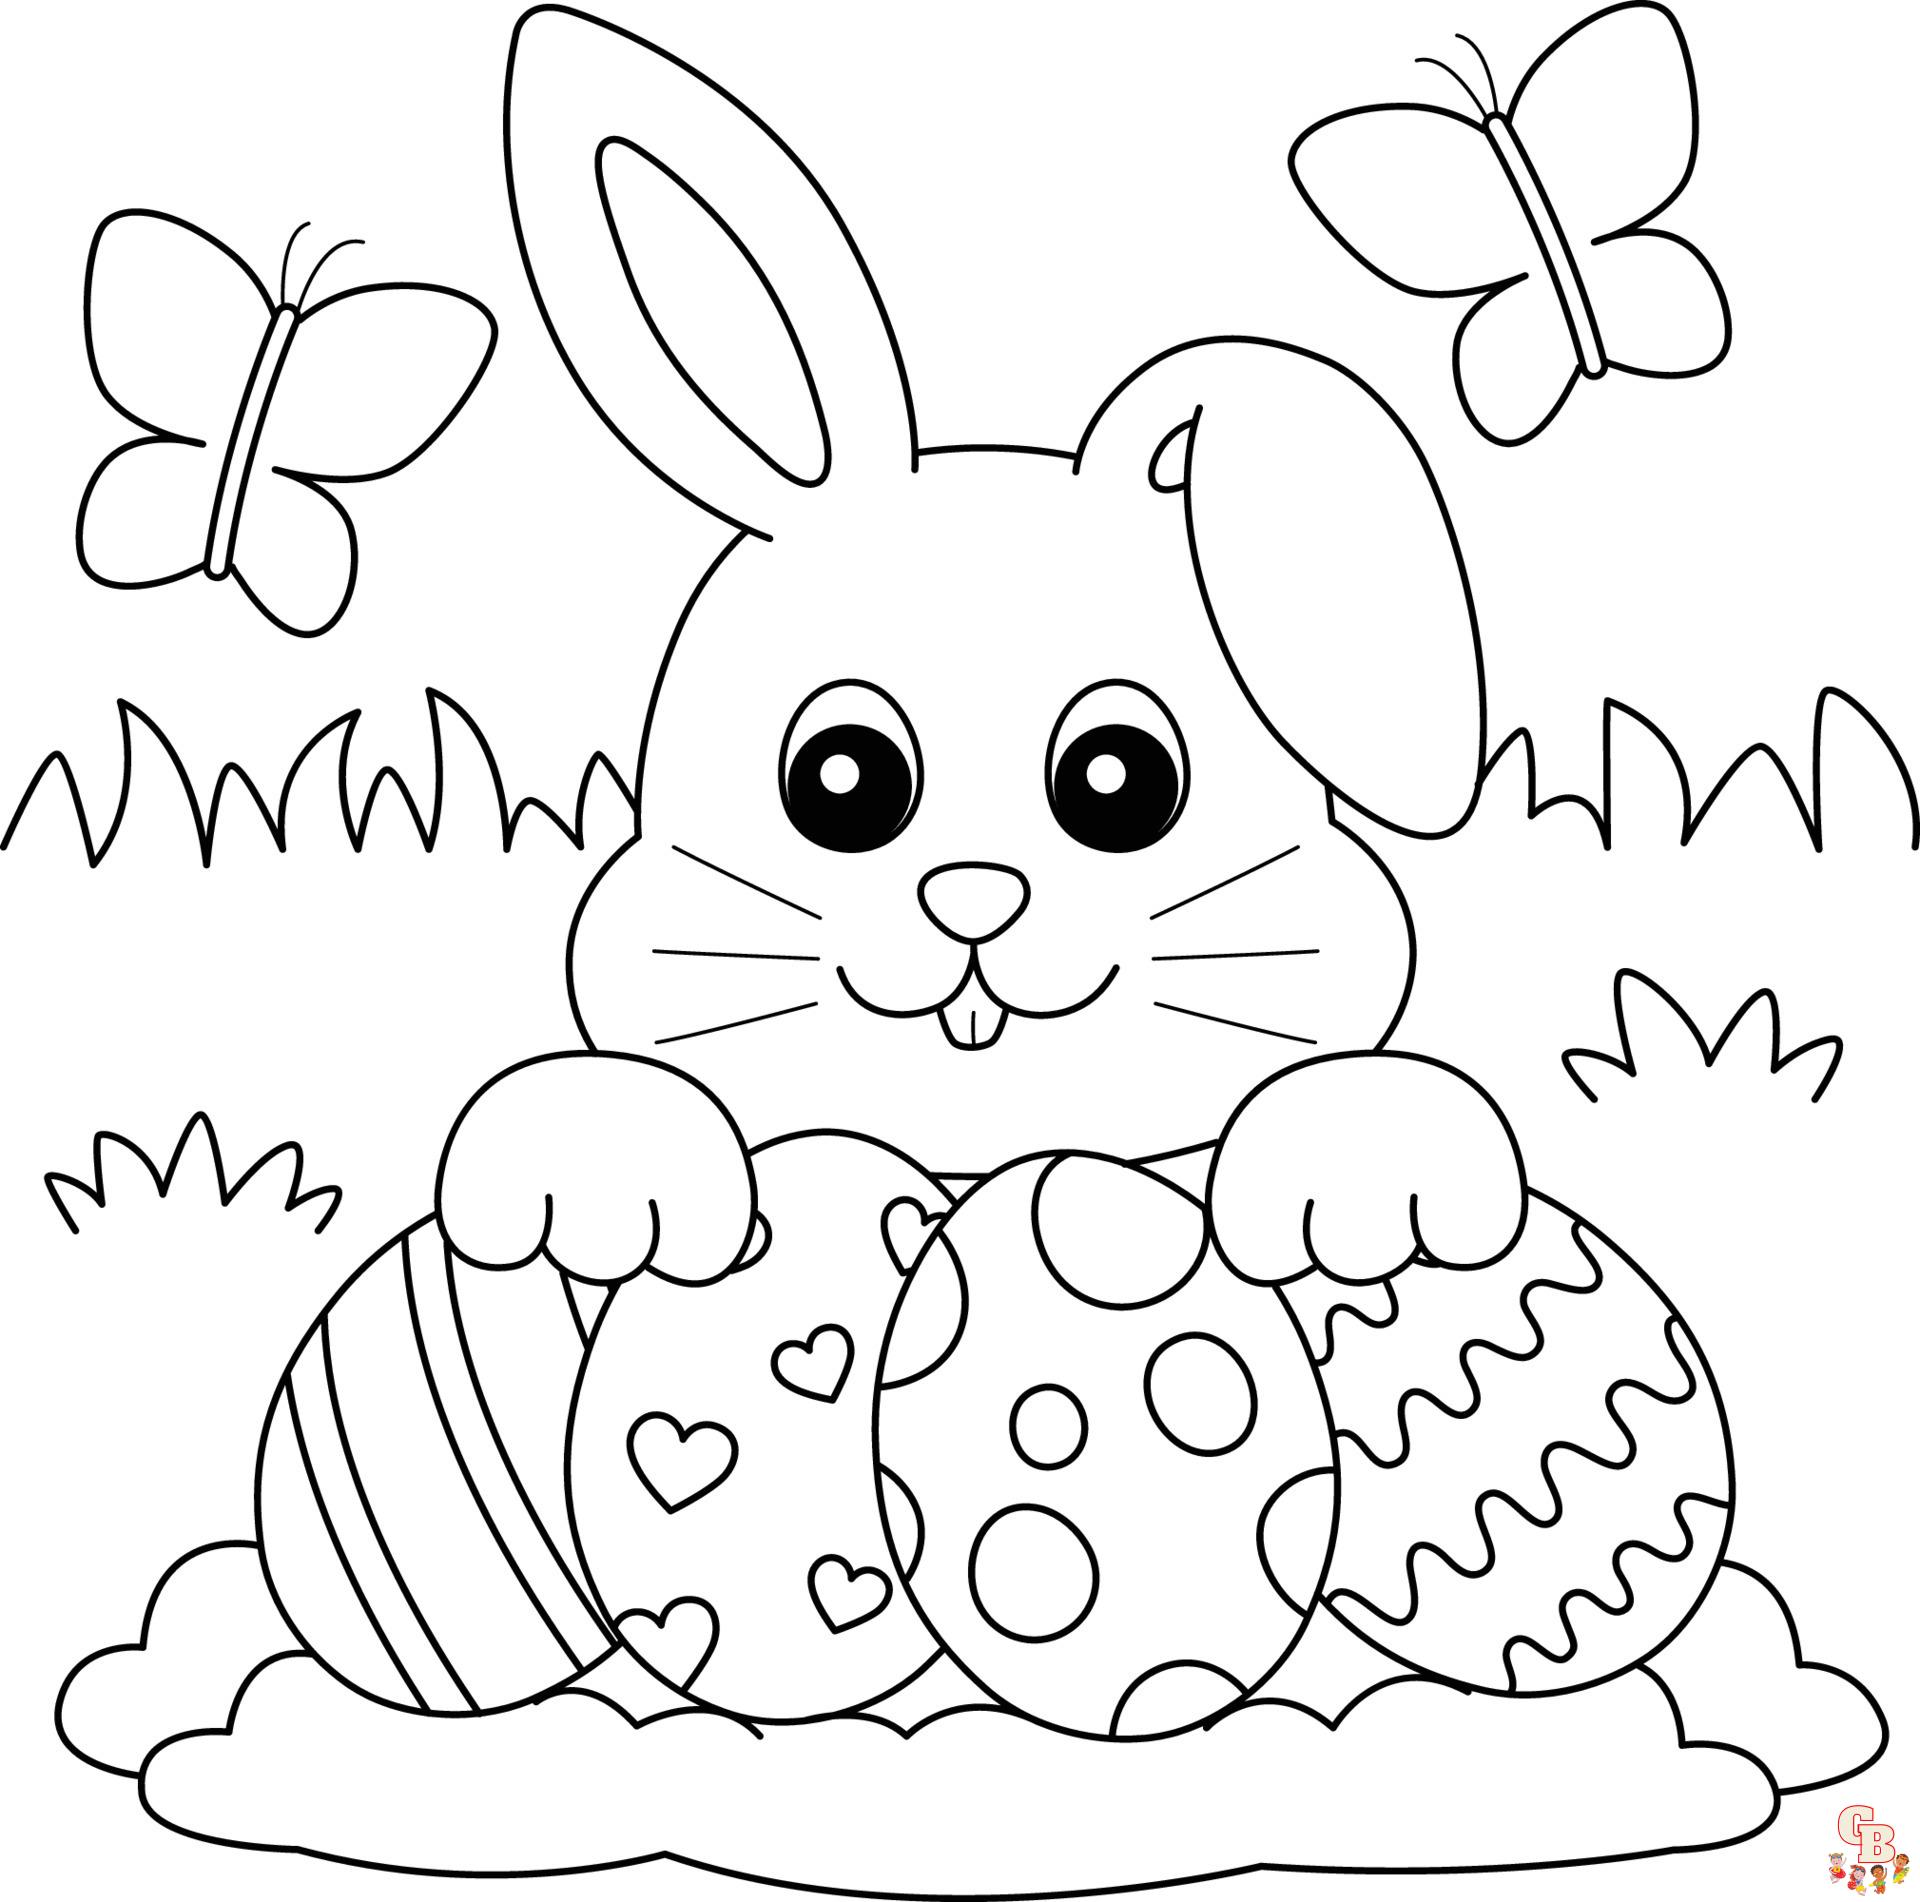 9+ Cute Easter Coloring Pages - Free Printable Sheets for Kids